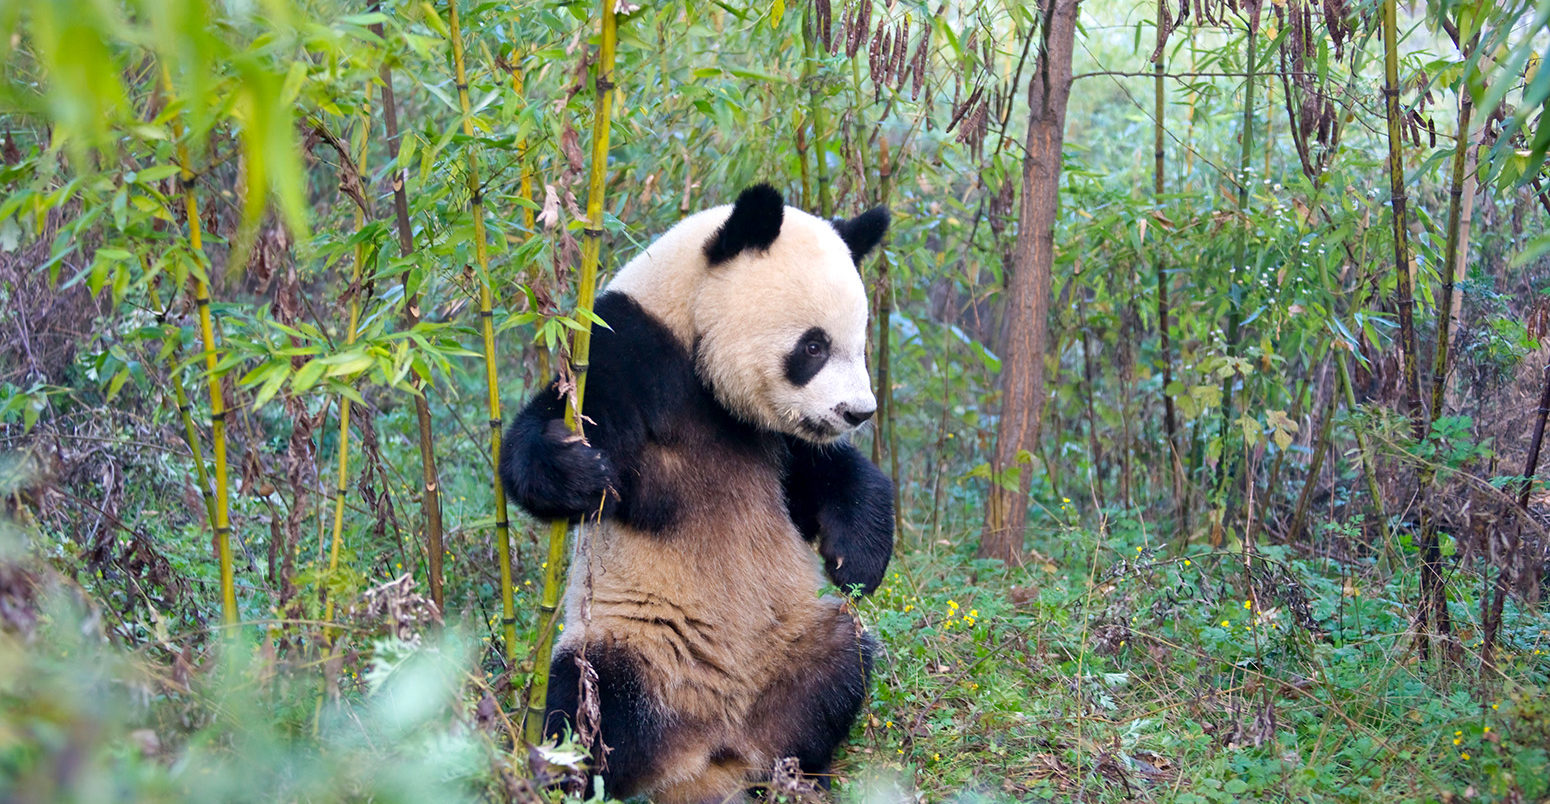 Giant Panda cub in the forest, Qinling, Shaanxi, China. Credit: Keren Su/China Span / Alamy Stock Photo. BR5YCF